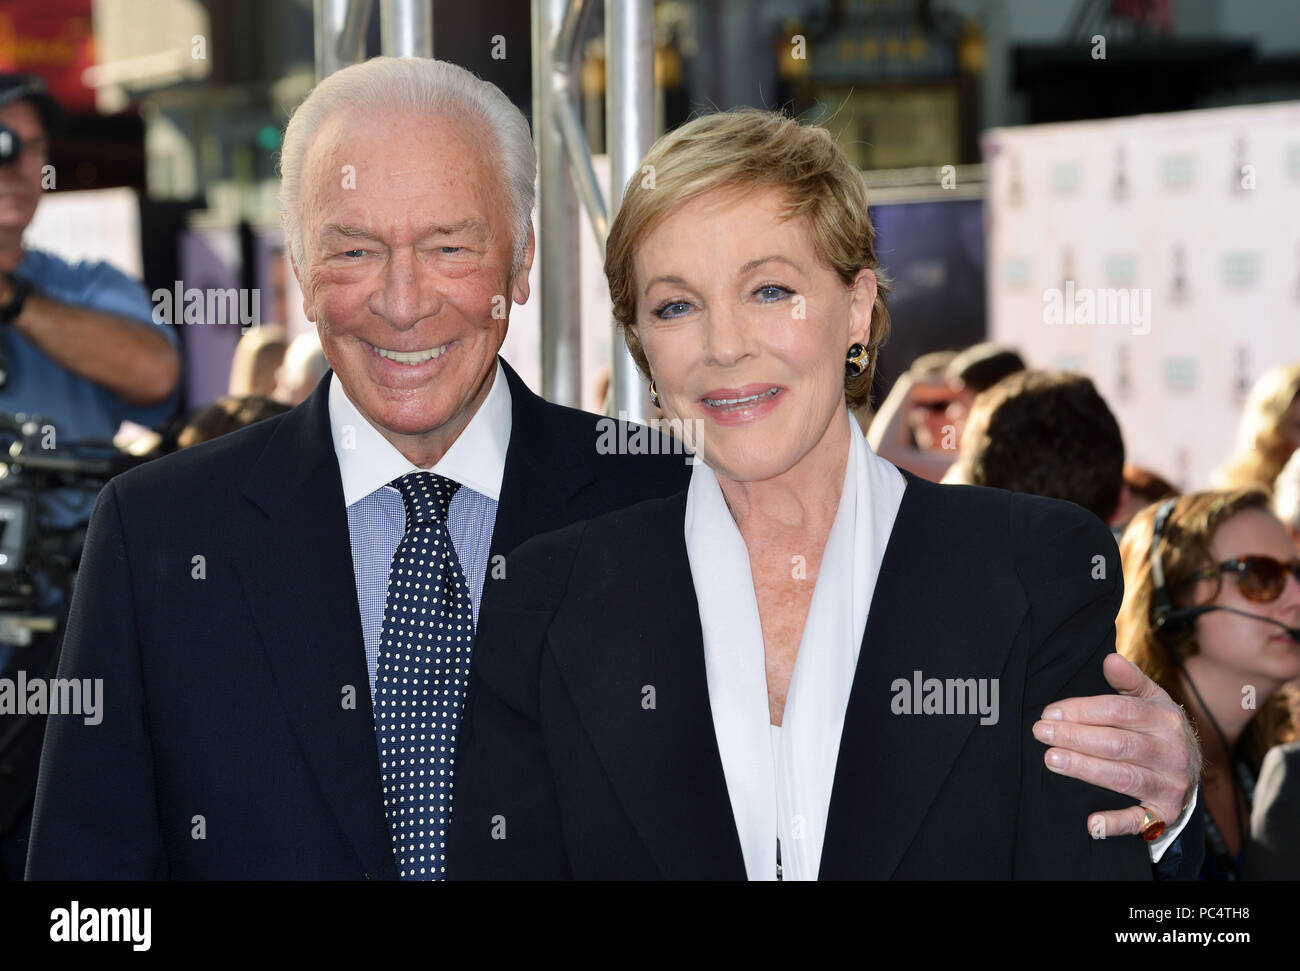 Christopher Plummer,  Julie Andrews 007 at The Sound Of Music Premiere at the TCL Chinese Theatre in Los Angeles. March 26, 2015.Christopher Plummer,  Julie Andrews 007  Event in Hollywood Life - California, Red Carpet Event, USA, Film Industry, Celebrities, Photography, Bestof, Arts Culture and Entertainment, Topix Celebrities fashion, Best of, Hollywood Life, Event in Hollywood Life - California, Red Carpet and backstage, movie celebrities, TV celebrities, Music celebrities, Arts Culture and Entertainment, vertical, one person, Photography,    inquiry tsuni@Gamma-USA.com , Credit Tsuni / USA Stock Photo